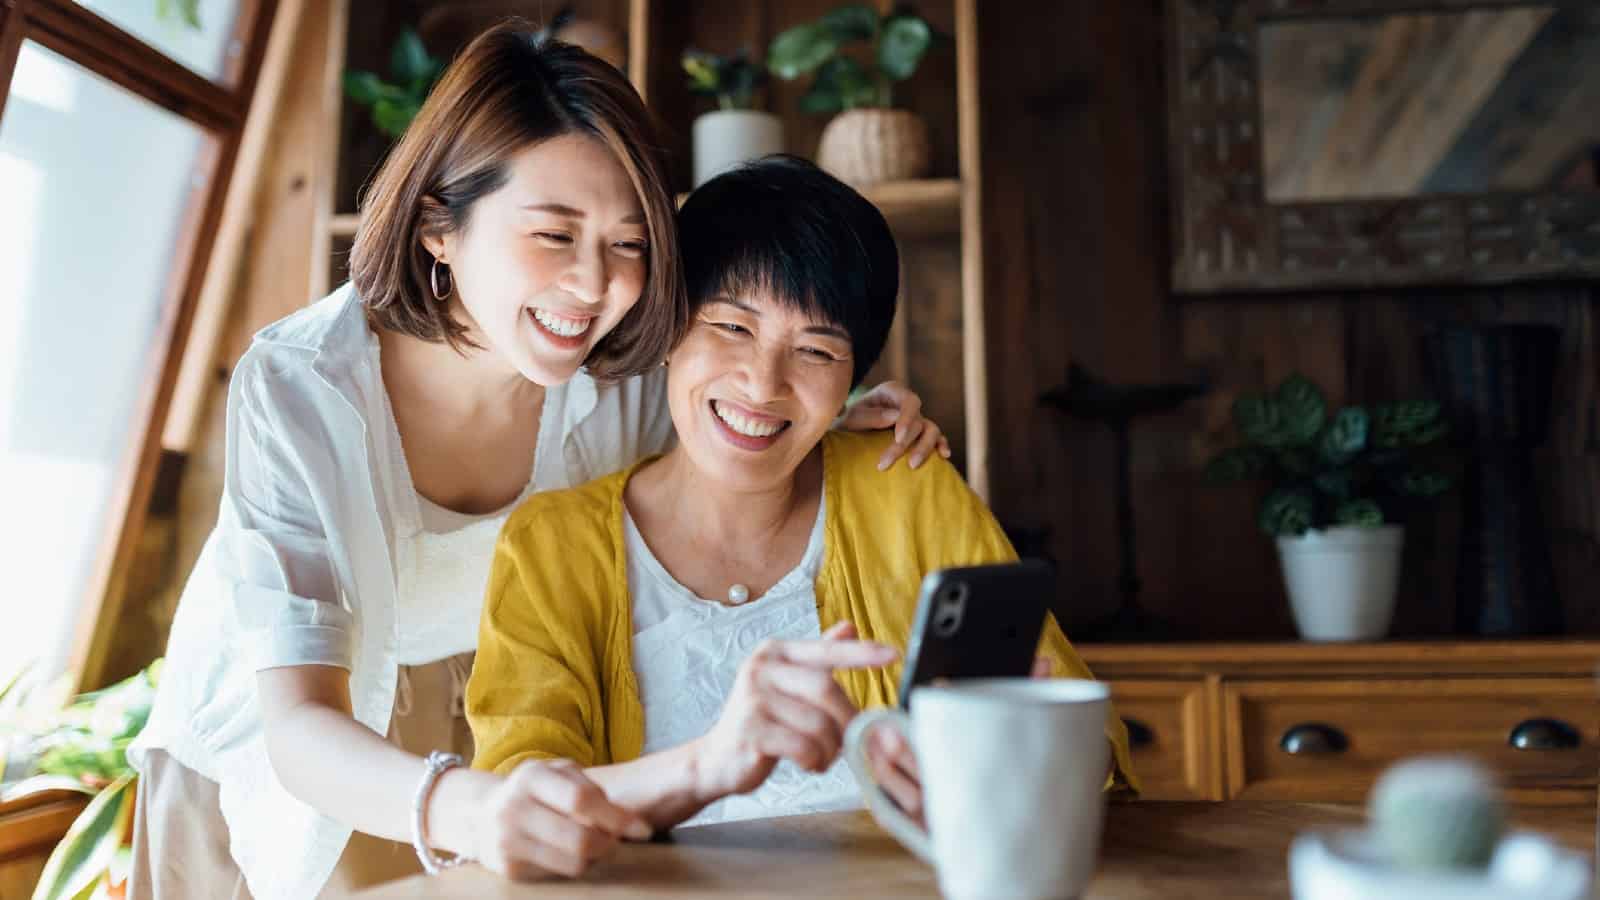 Affectionate Asian senior mother and daughter using smartphone together at home, smiling joyfully